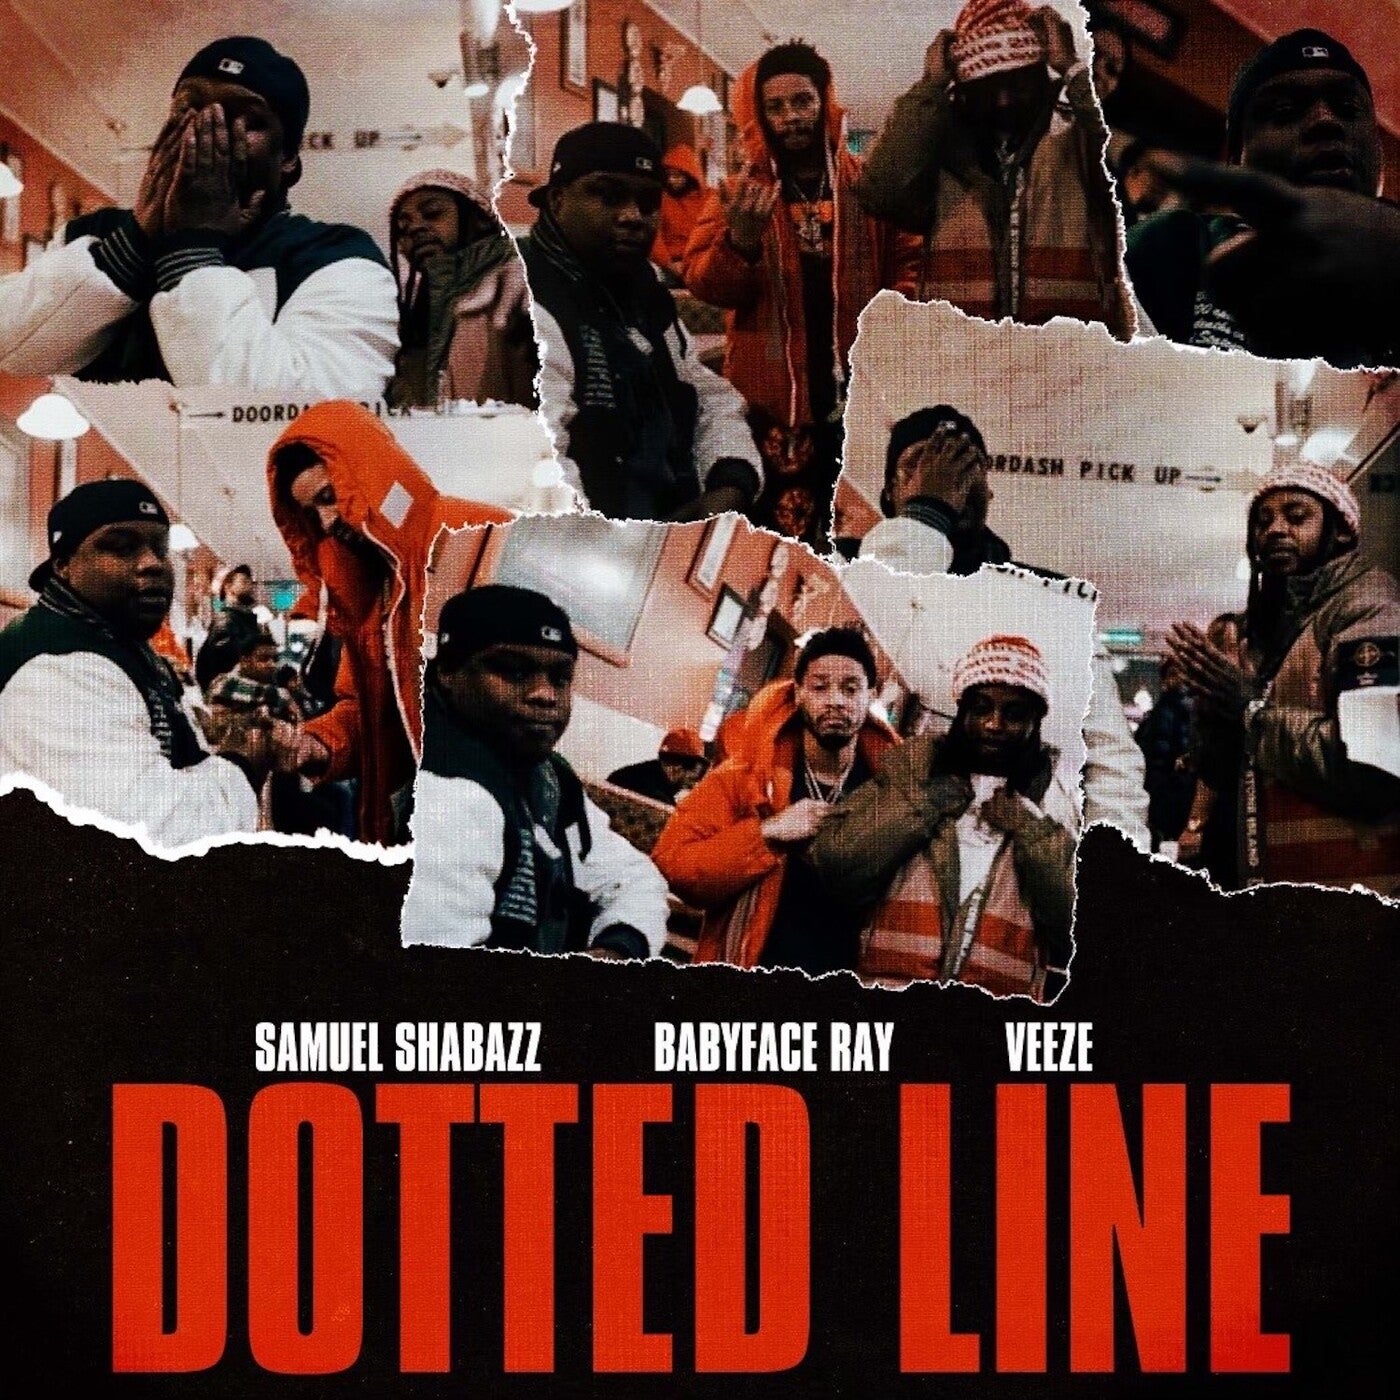 DOTTED LINE (feat. Veeze) by Babyface Ray, Veeze and Samuel 